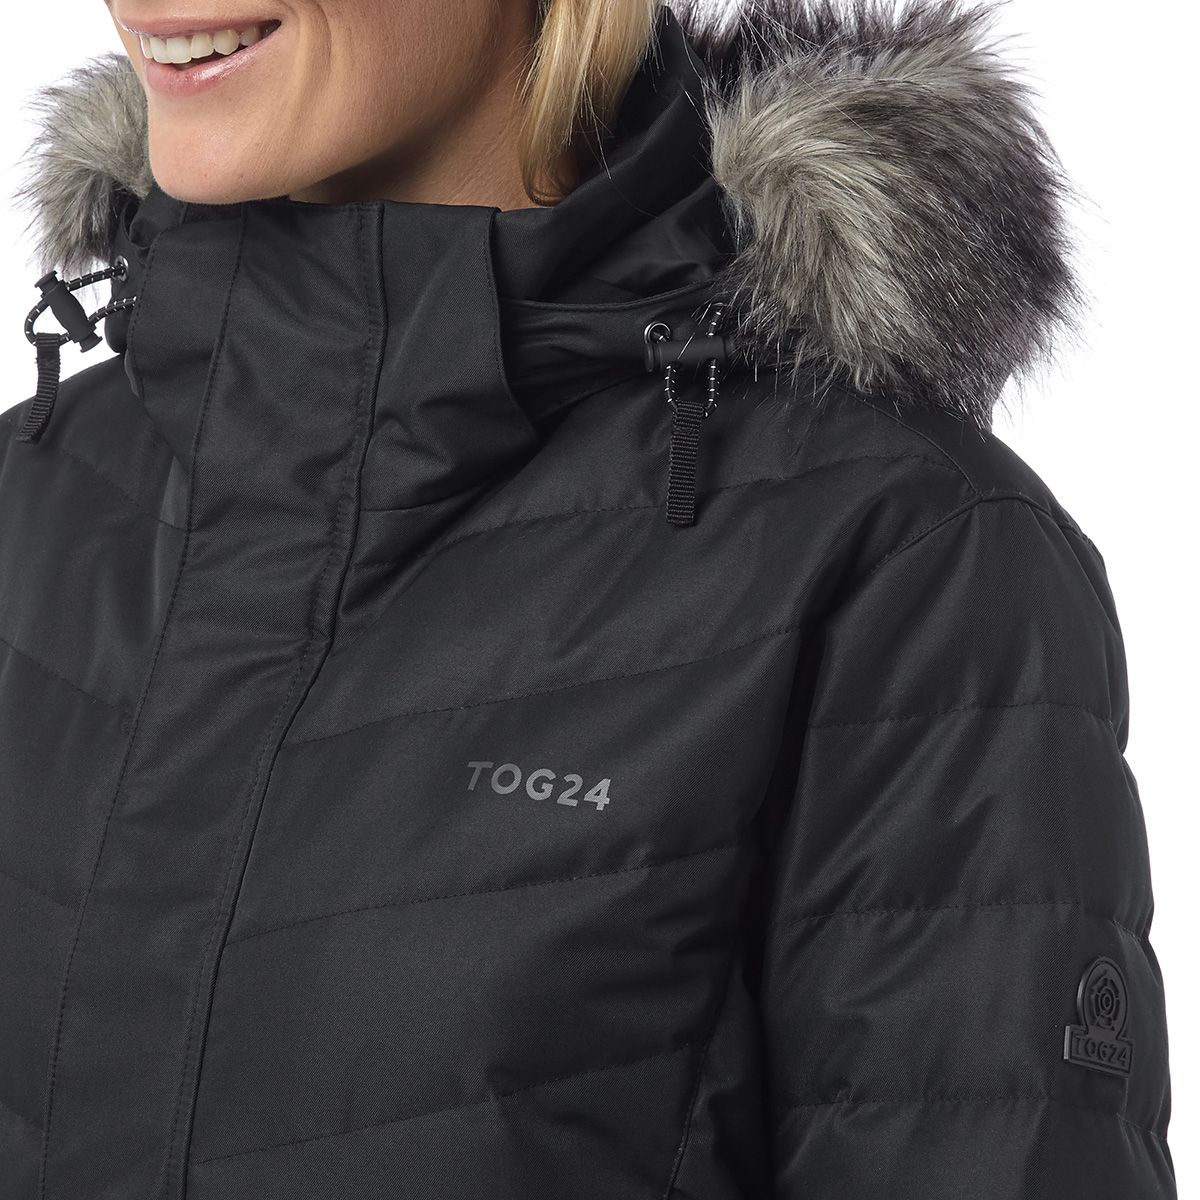 Indulge yourself with an Alpine jacket that’s the perfect antidote to wintry weather. Kirby’s waterproof and breathable face fabric is traversed with chevron stitch lines that create a flattering profile, while inside, the luxurious down fill delivers enviable insulation. On-board tech includes magnetic storm flap closure, venting zips and snow skirt, all topped off with a fabulous faux-fur-trimmed hood. What’s not to love?